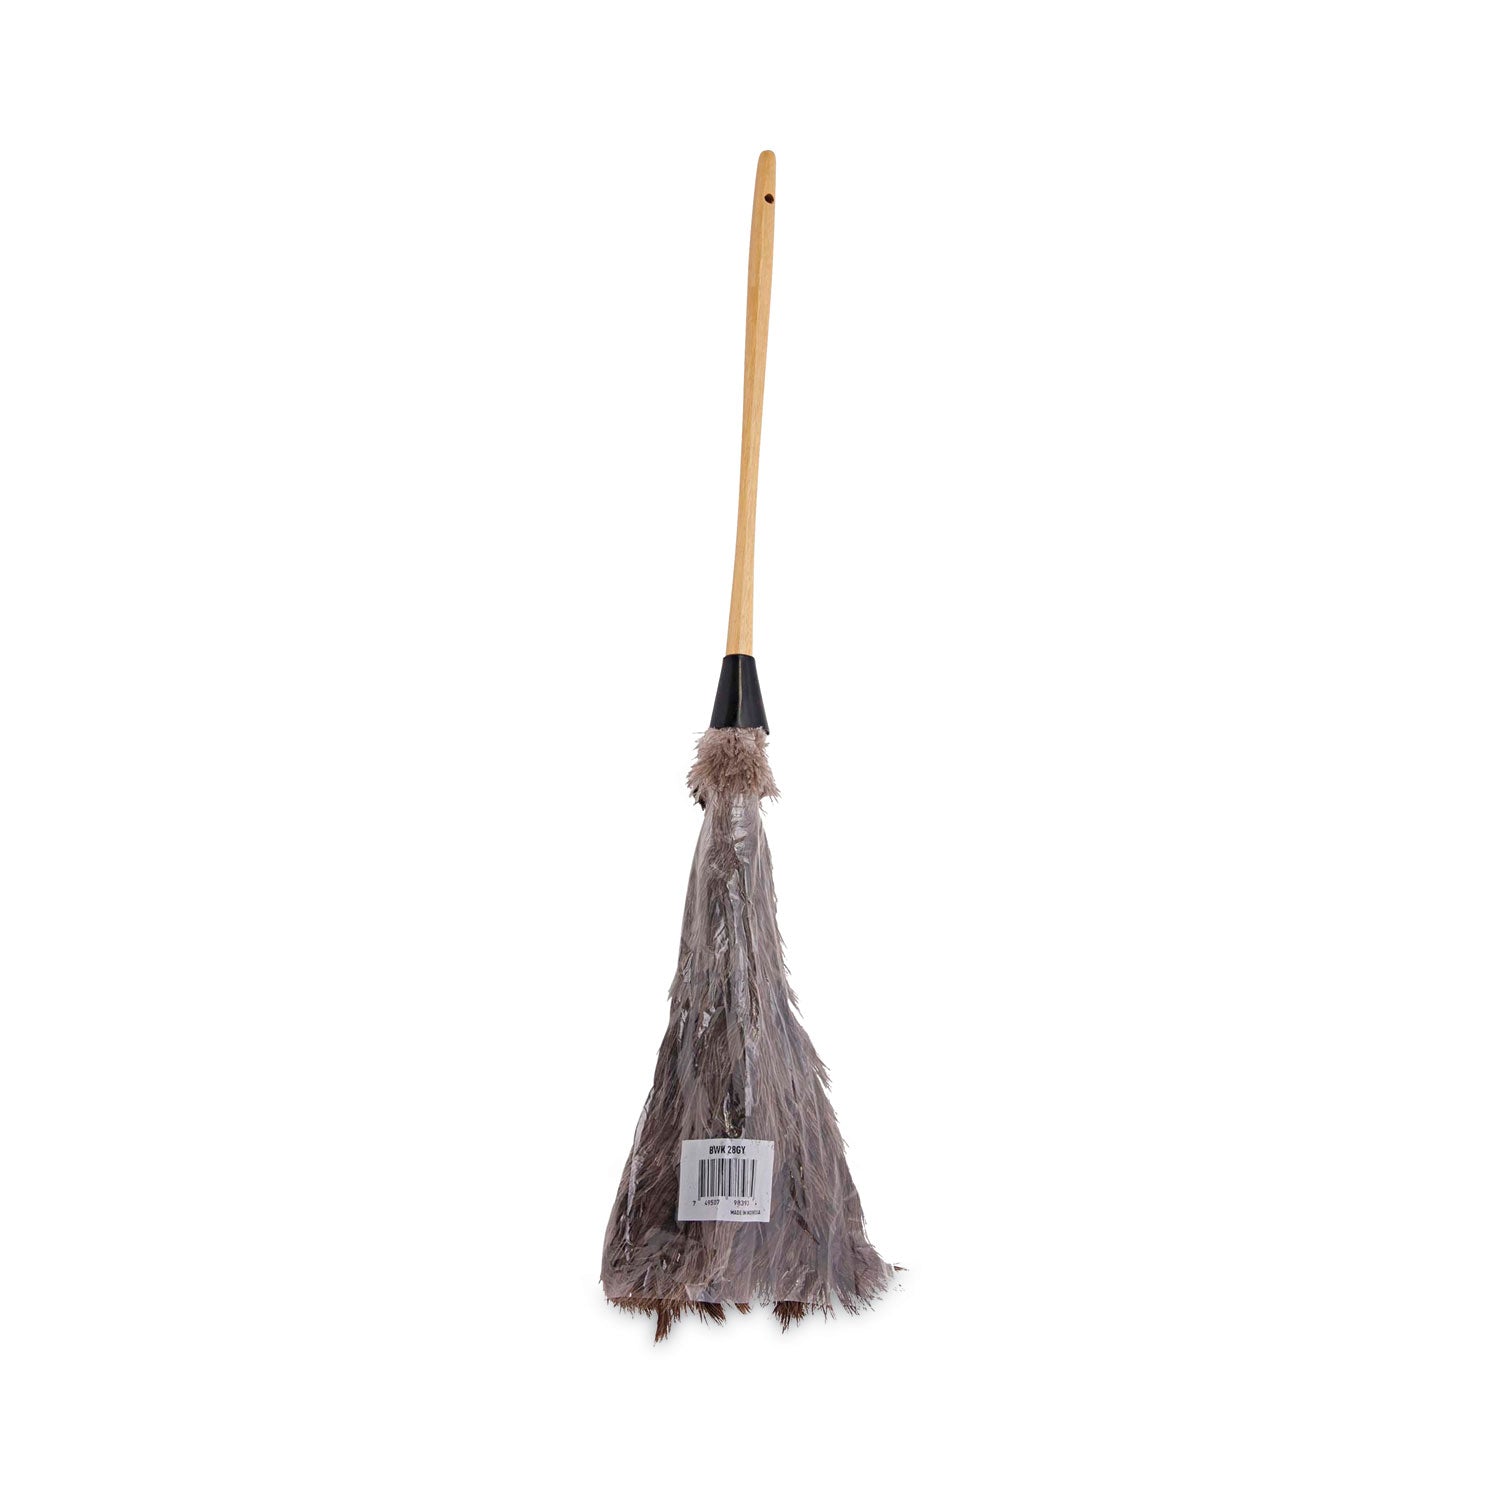 professional-ostrich-feather-duster-16-handle_bwk28gy - 7